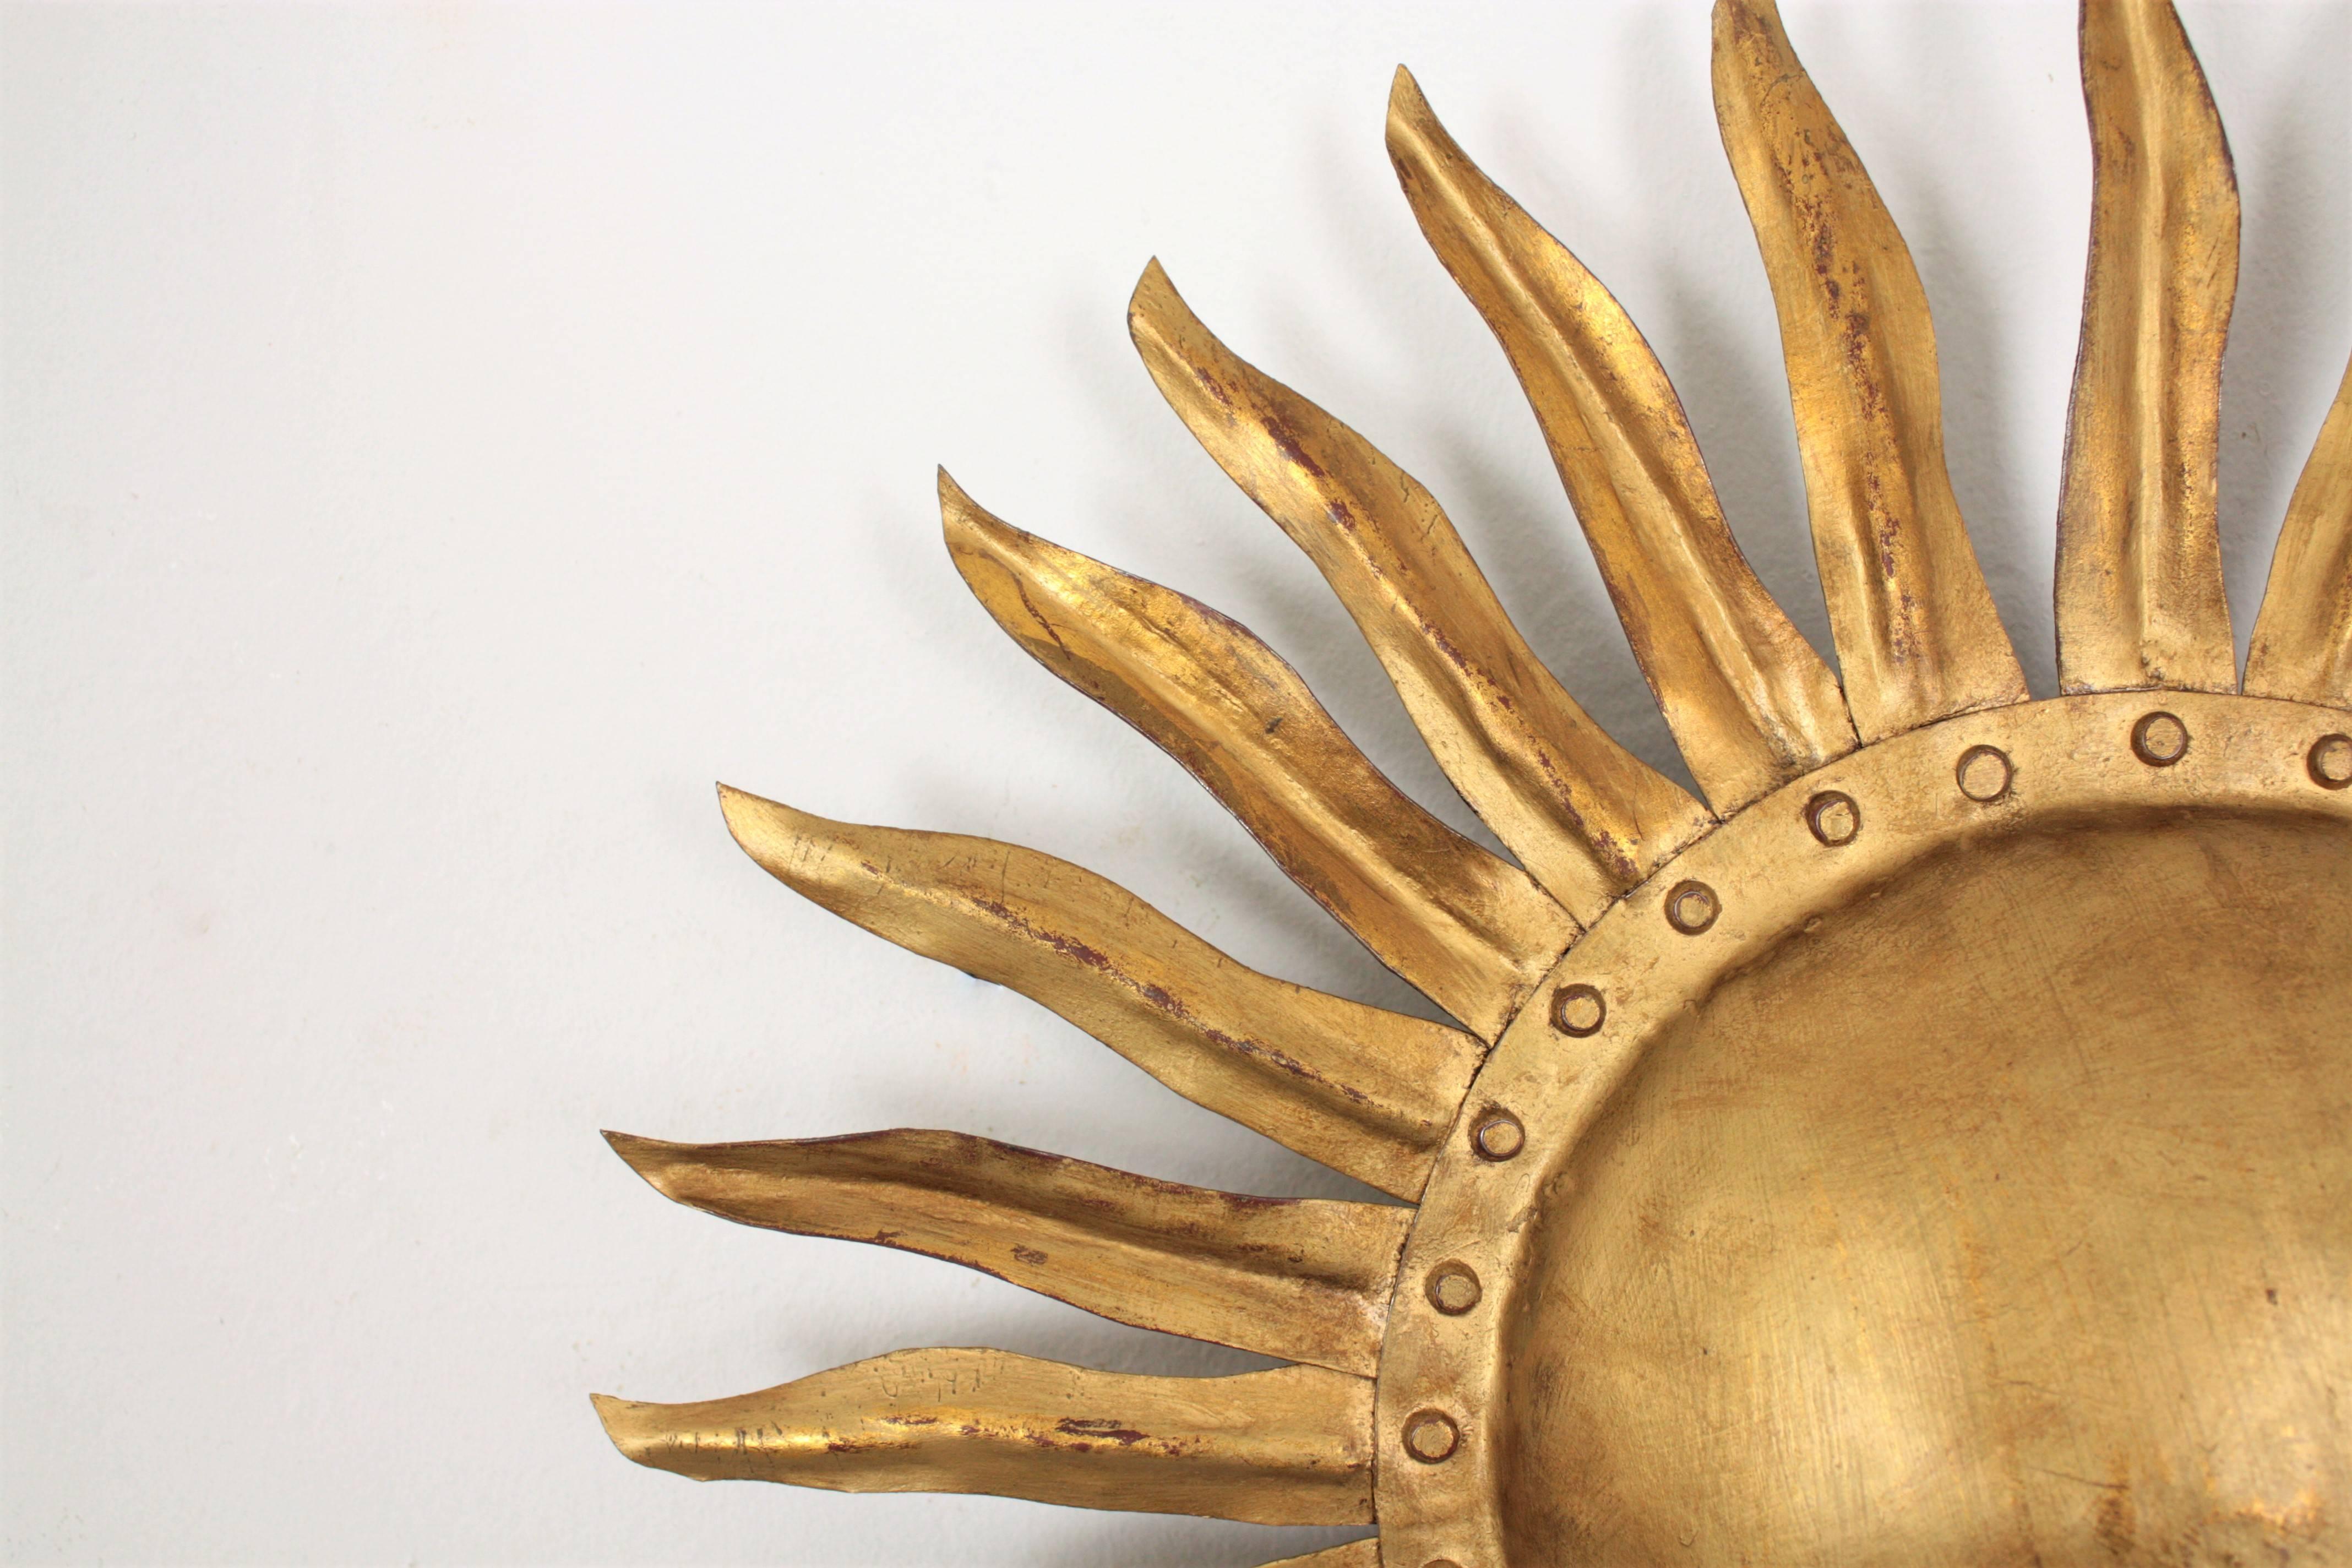 Hand-Crafted 1940s Spanish Gilt Iron Sunburst Wall Sconce or Ceiling Light Fixture